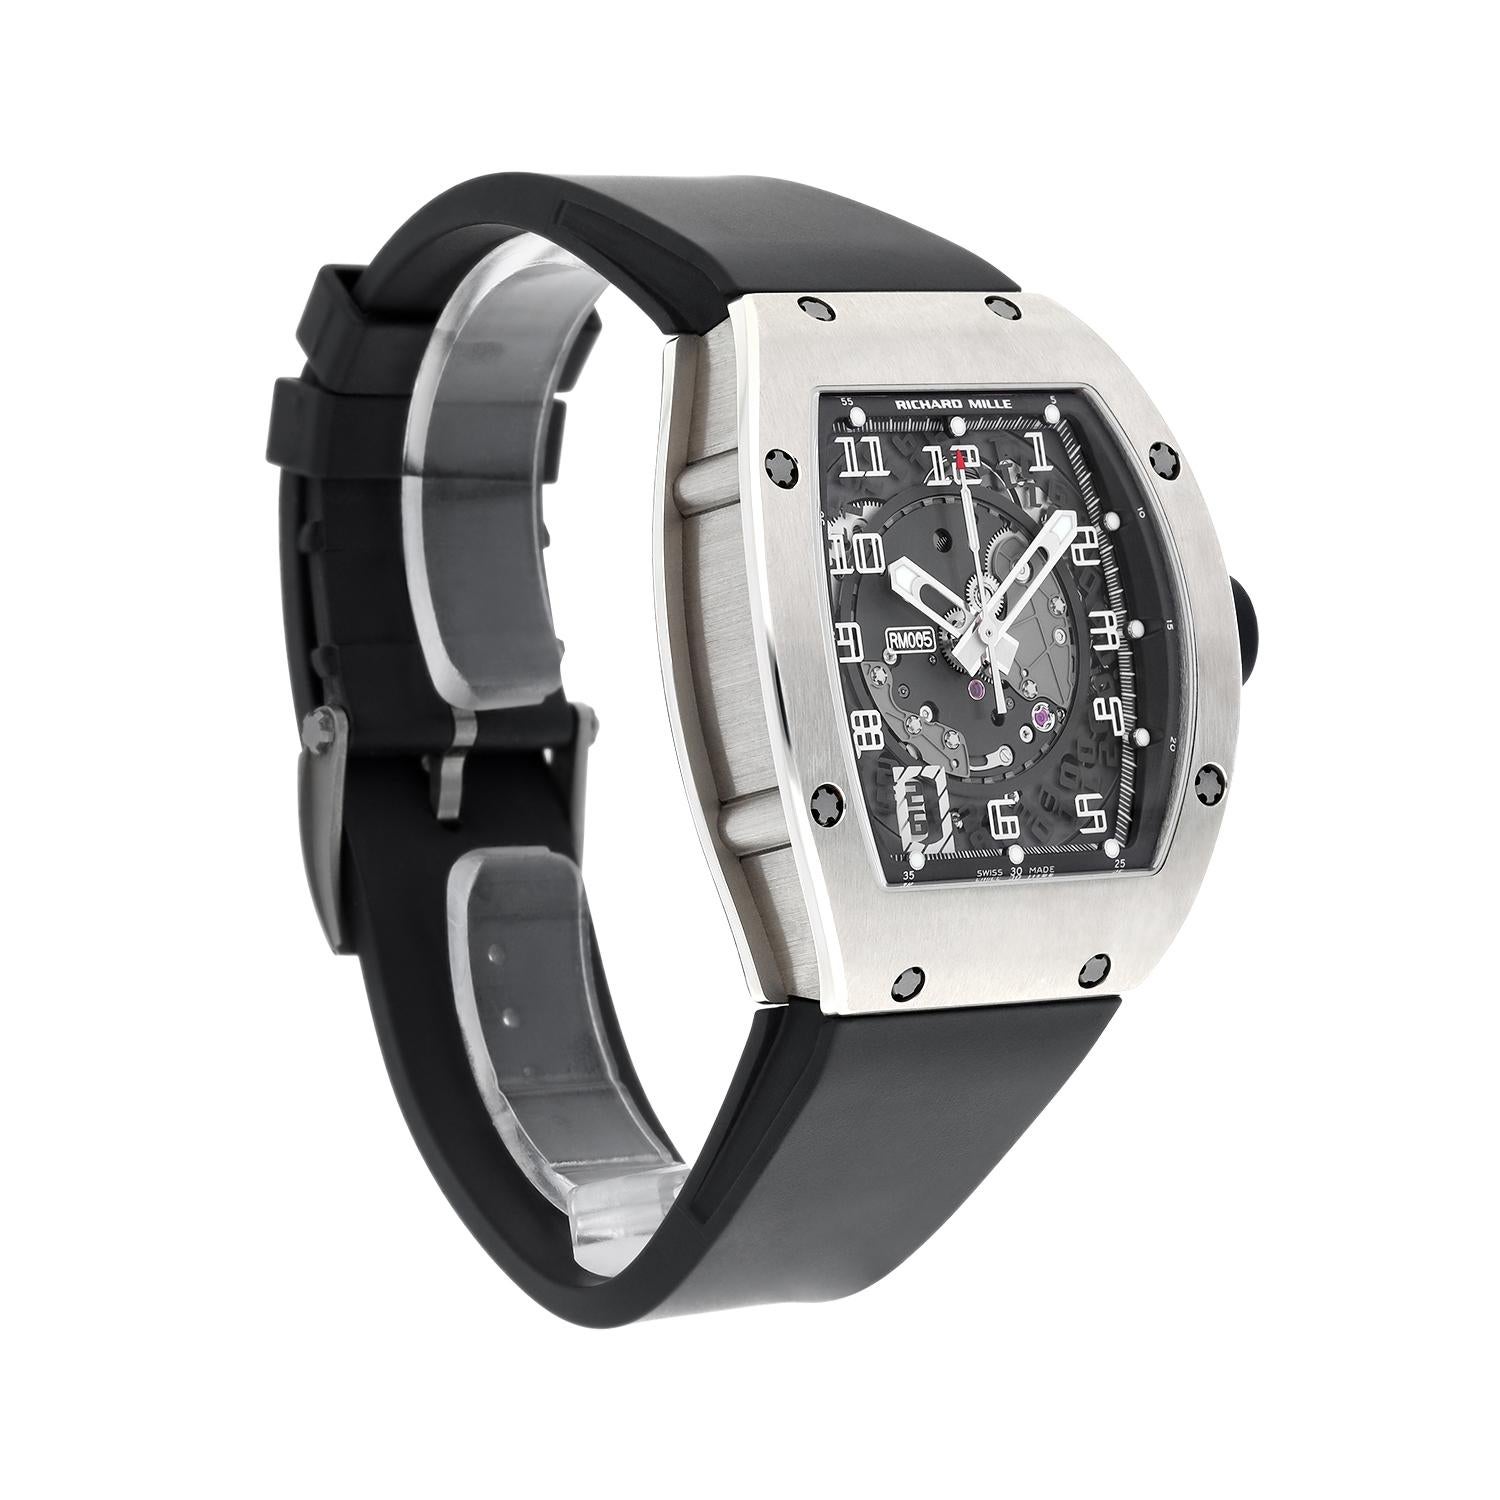 Richard Mille RM 005 Manual Wind White Gold Mens Watch Rubber Band Complete For Sale 1